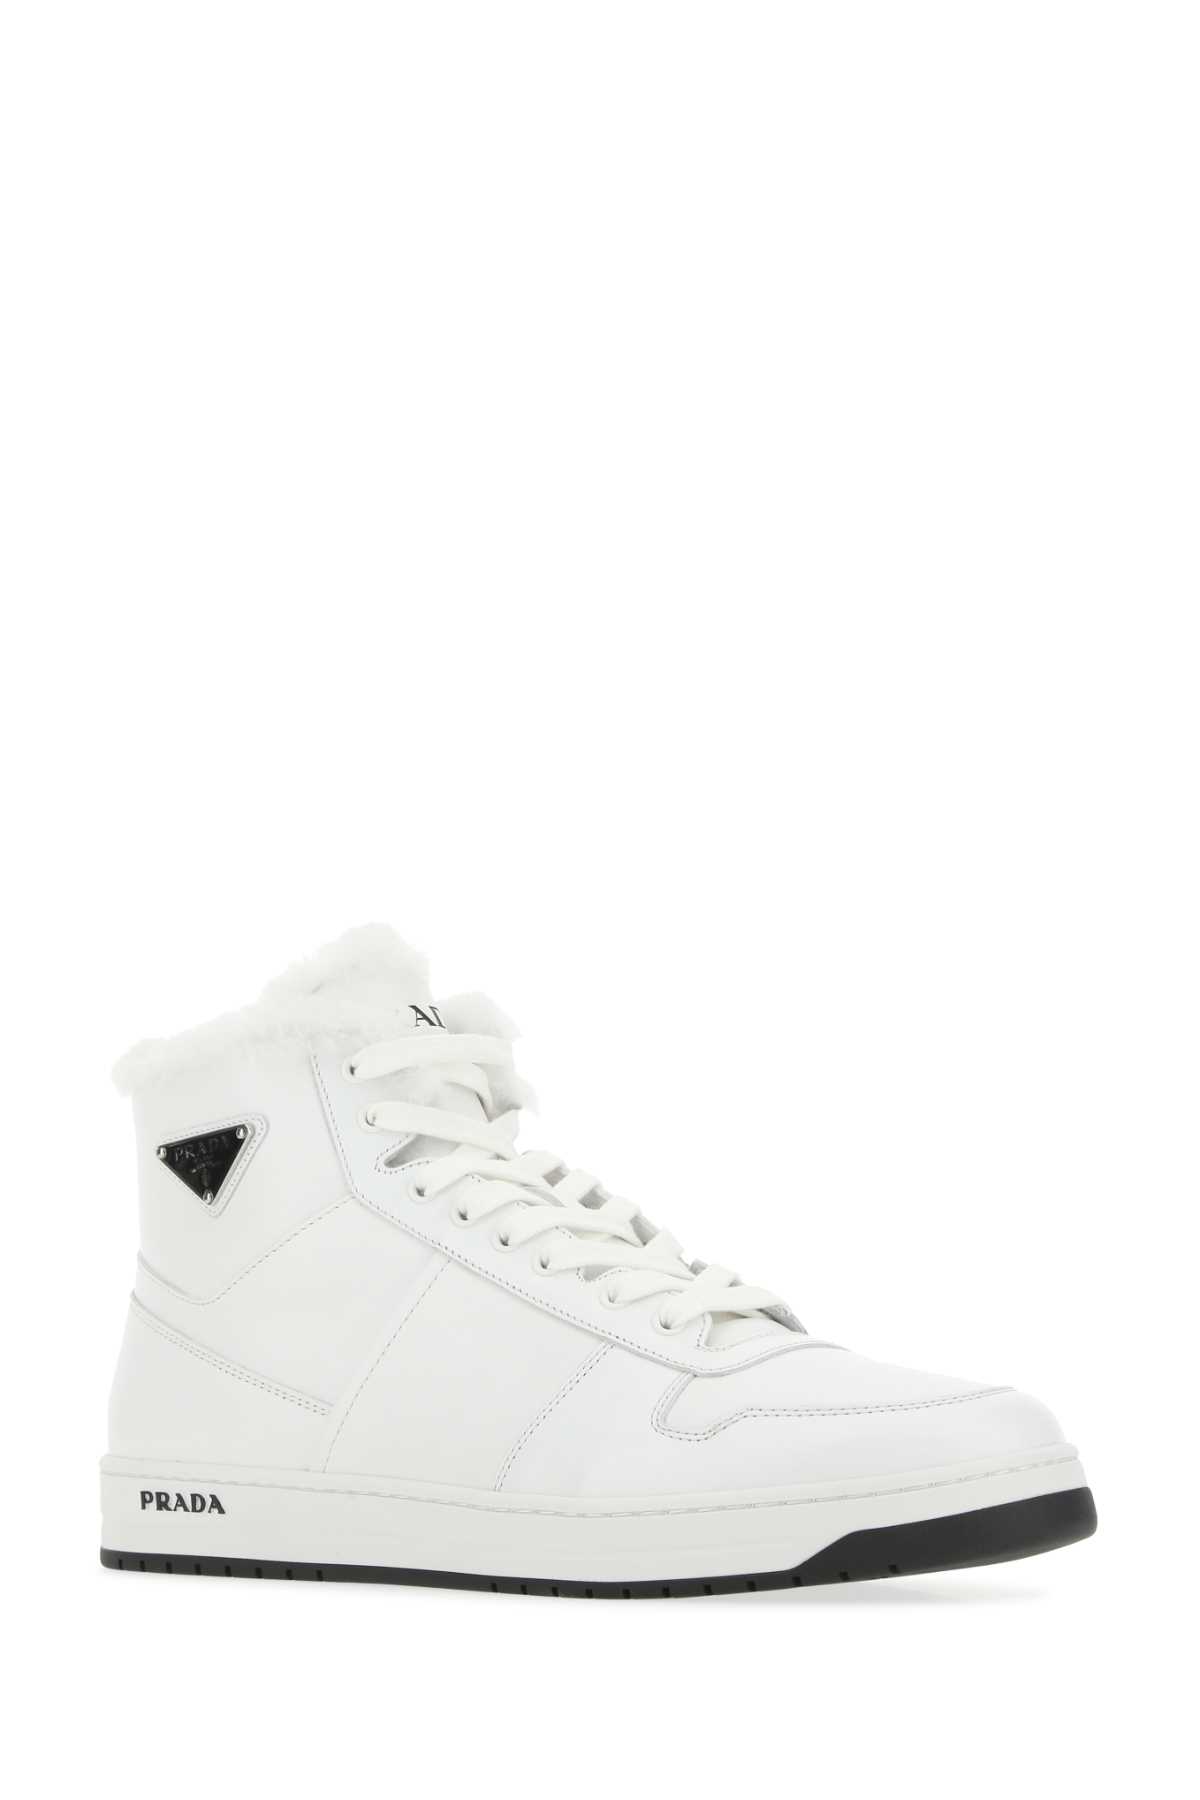 Shop Prada White Leather Sneakers In F0009